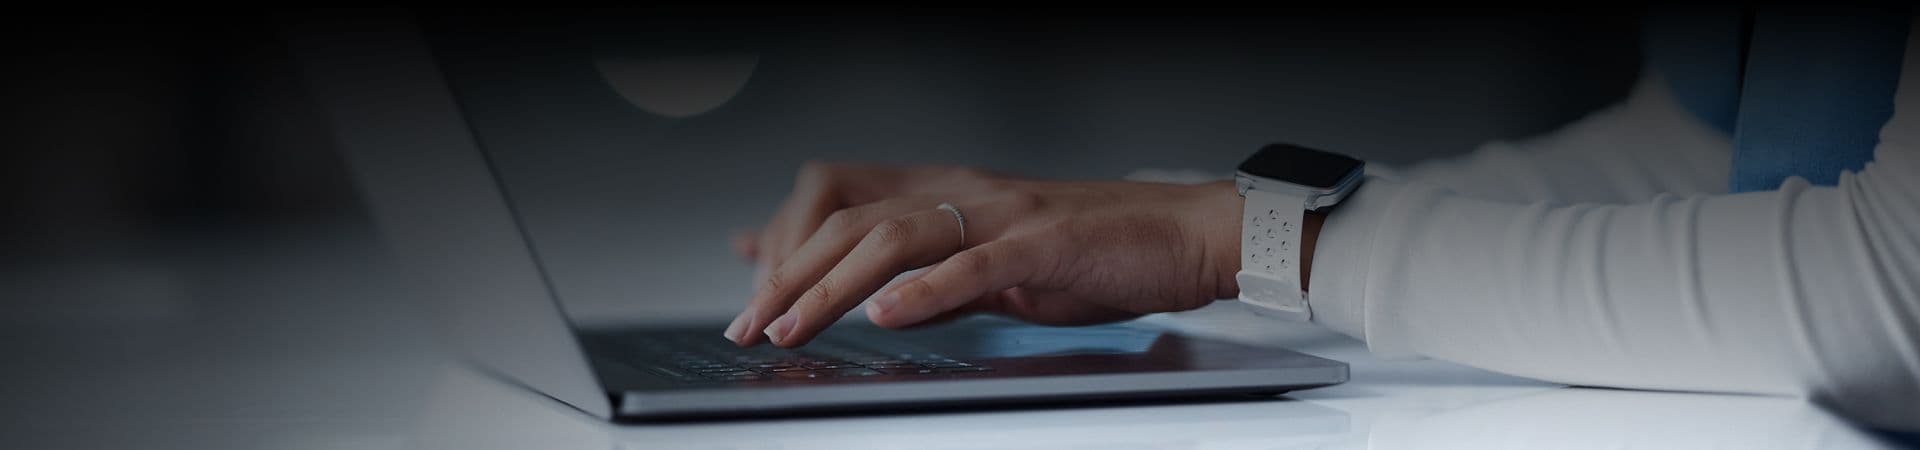 An image of a person's hand typing something on her laptop.